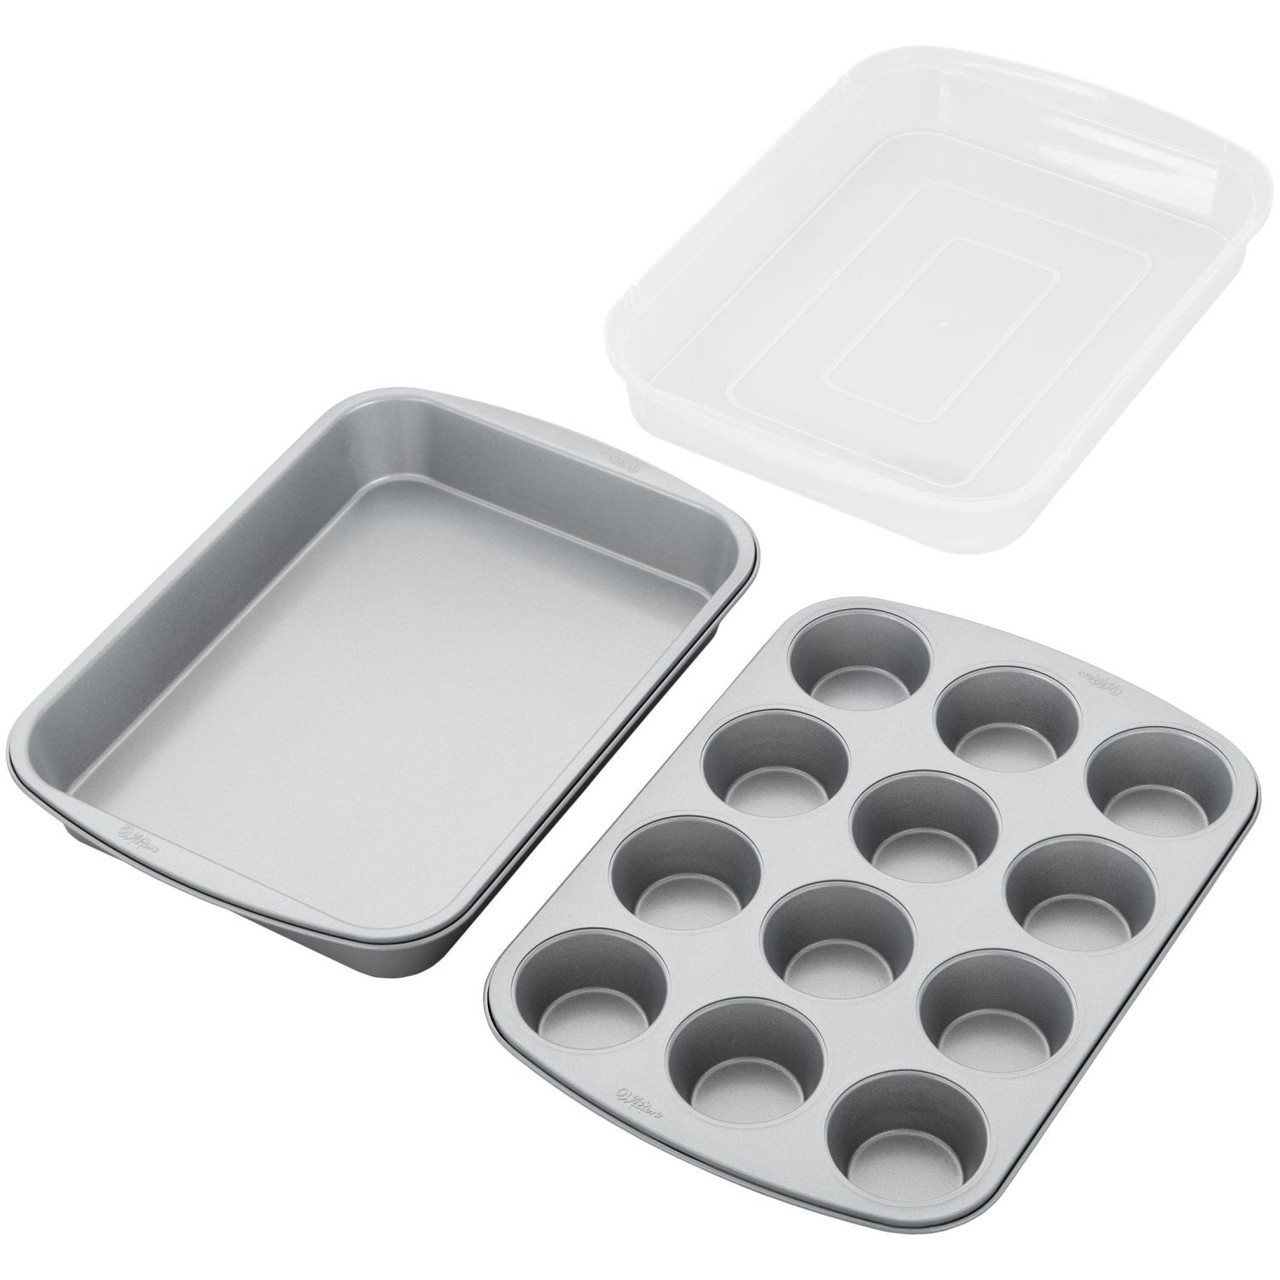 Kayannuo Bedroom Decor Clearance Cake Pan, Non-Stick Cake Baking Pan with  Dividers, Cake Cutter,Cake Tray,18 Pre-Slice Cake Baking Tray, Muffin And  Cupcake Pan for Oven Baking Living Room Decor 